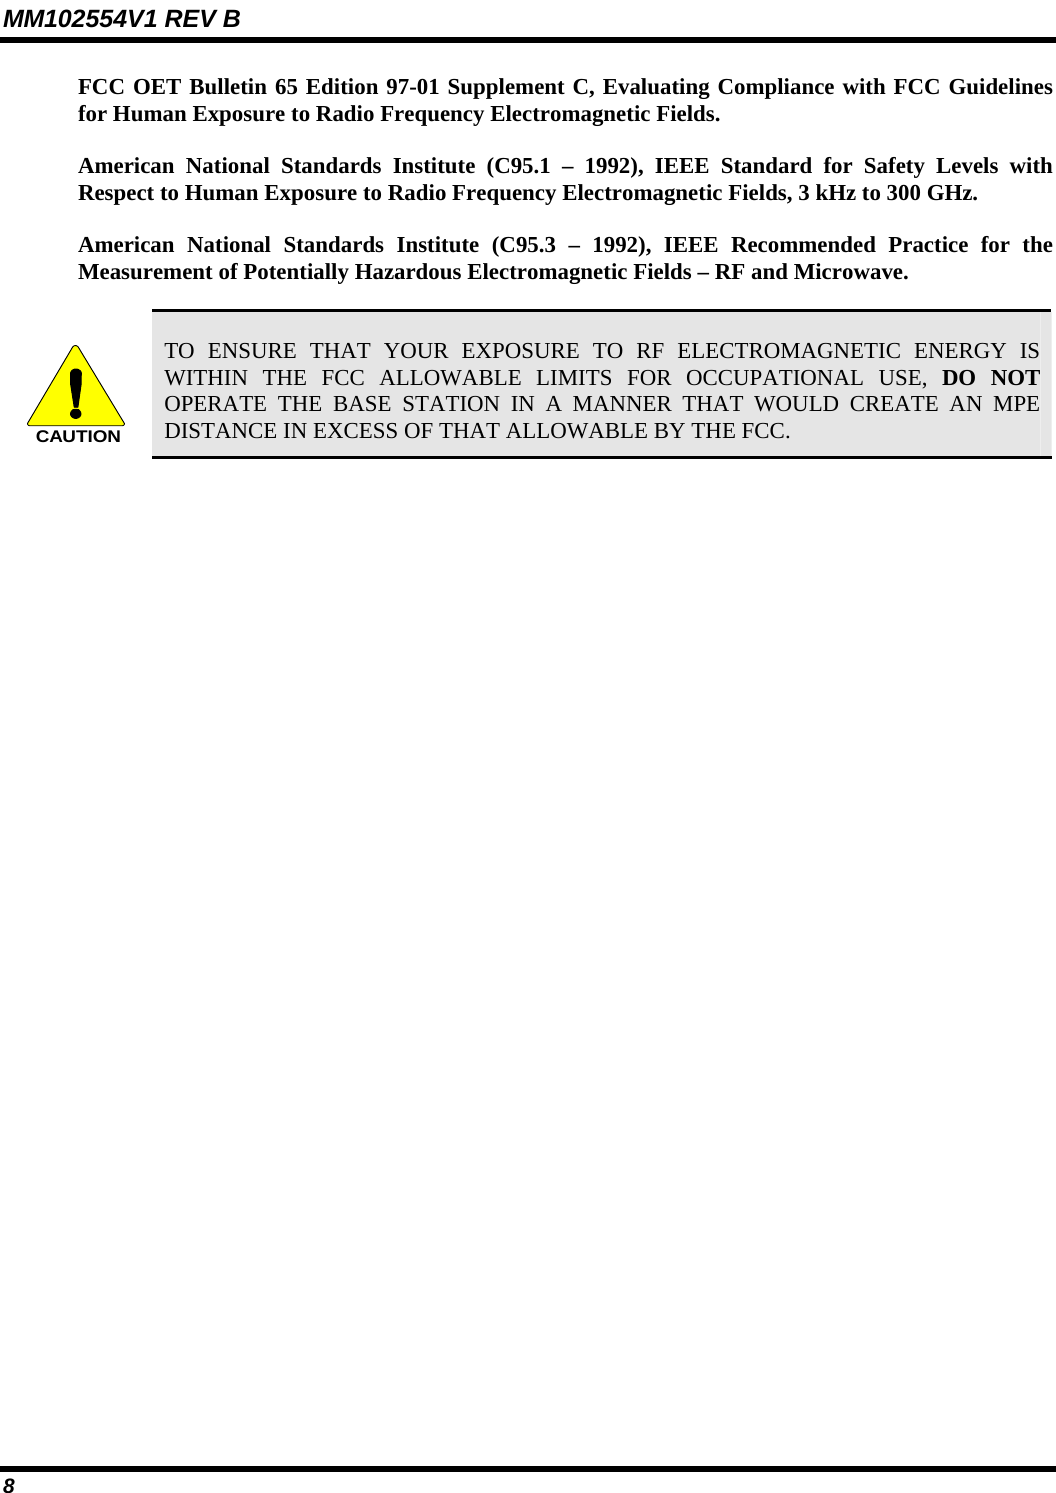 MM102554V1 REV B 8   FCC OET Bulletin 65 Edition 97-01 Supplement C, Evaluating Compliance with FCC Guidelines for Human Exposure to Radio Frequency Electromagnetic Fields. American National Standards Institute (C95.1 – 1992), IEEE Standard for Safety Levels with Respect to Human Exposure to Radio Frequency Electromagnetic Fields, 3 kHz to 300 GHz. American National Standards Institute (C95.3 – 1992), IEEE Recommended Practice for the Measurement of Potentially Hazardous Electromagnetic Fields – RF and Microwave.  CAUTION TO ENSURE THAT YOUR EXPOSURE TO RF ELECTROMAGNETIC ENERGY IS WITHIN THE FCC ALLOWABLE LIMITS FOR OCCUPATIONAL USE, DO NOT OPERATE THE BASE STATION IN A MANNER THAT WOULD CREATE AN MPE DISTANCE IN EXCESS OF THAT ALLOWABLE BY THE FCC. 